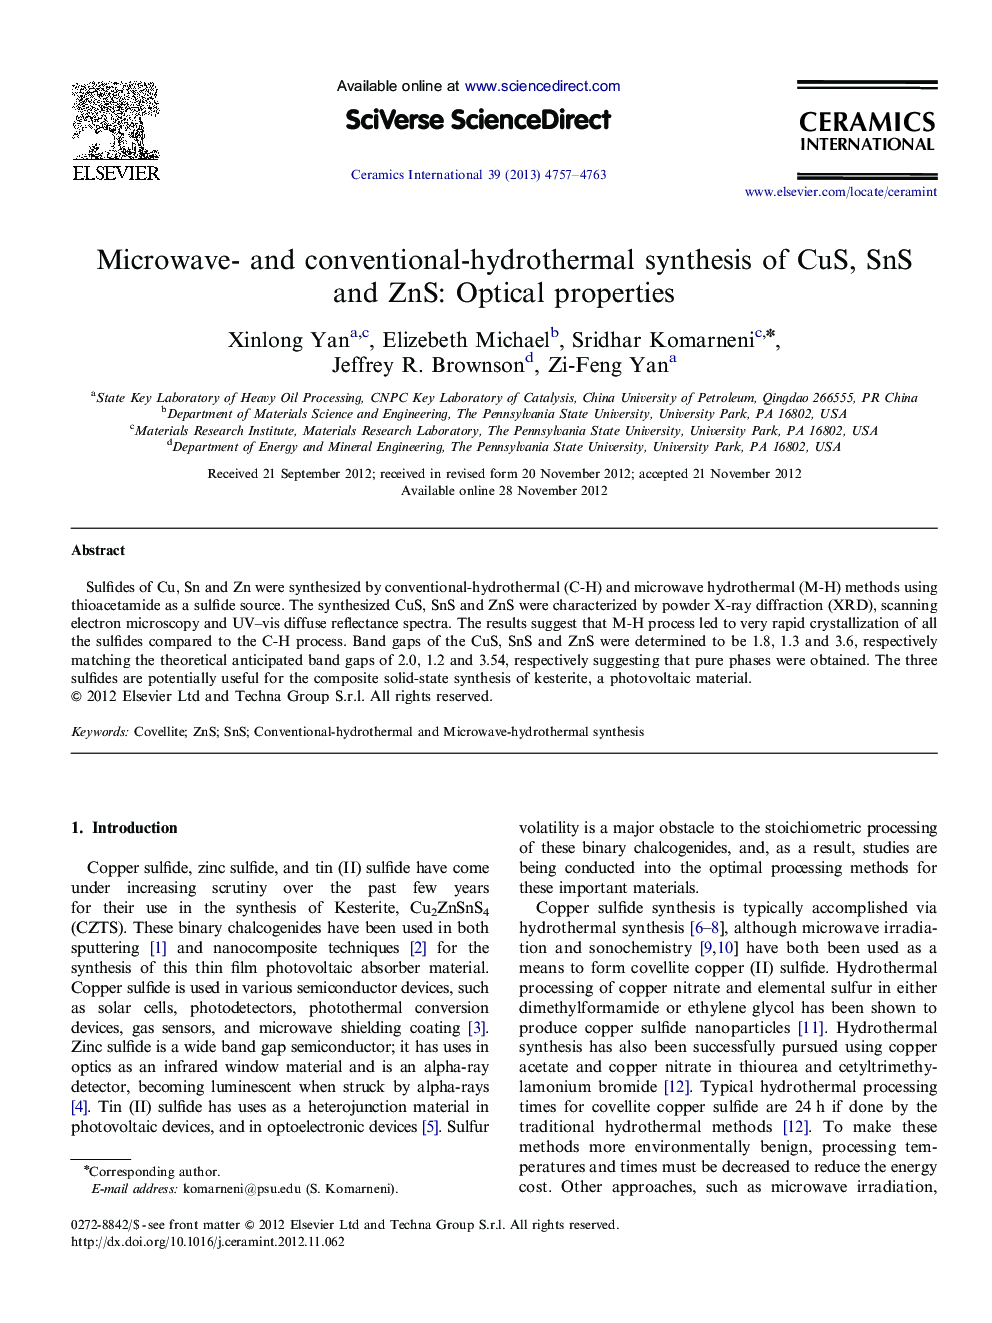 Microwave- and conventional-hydrothermal synthesis of CuS, SnS and ZnS: Optical properties